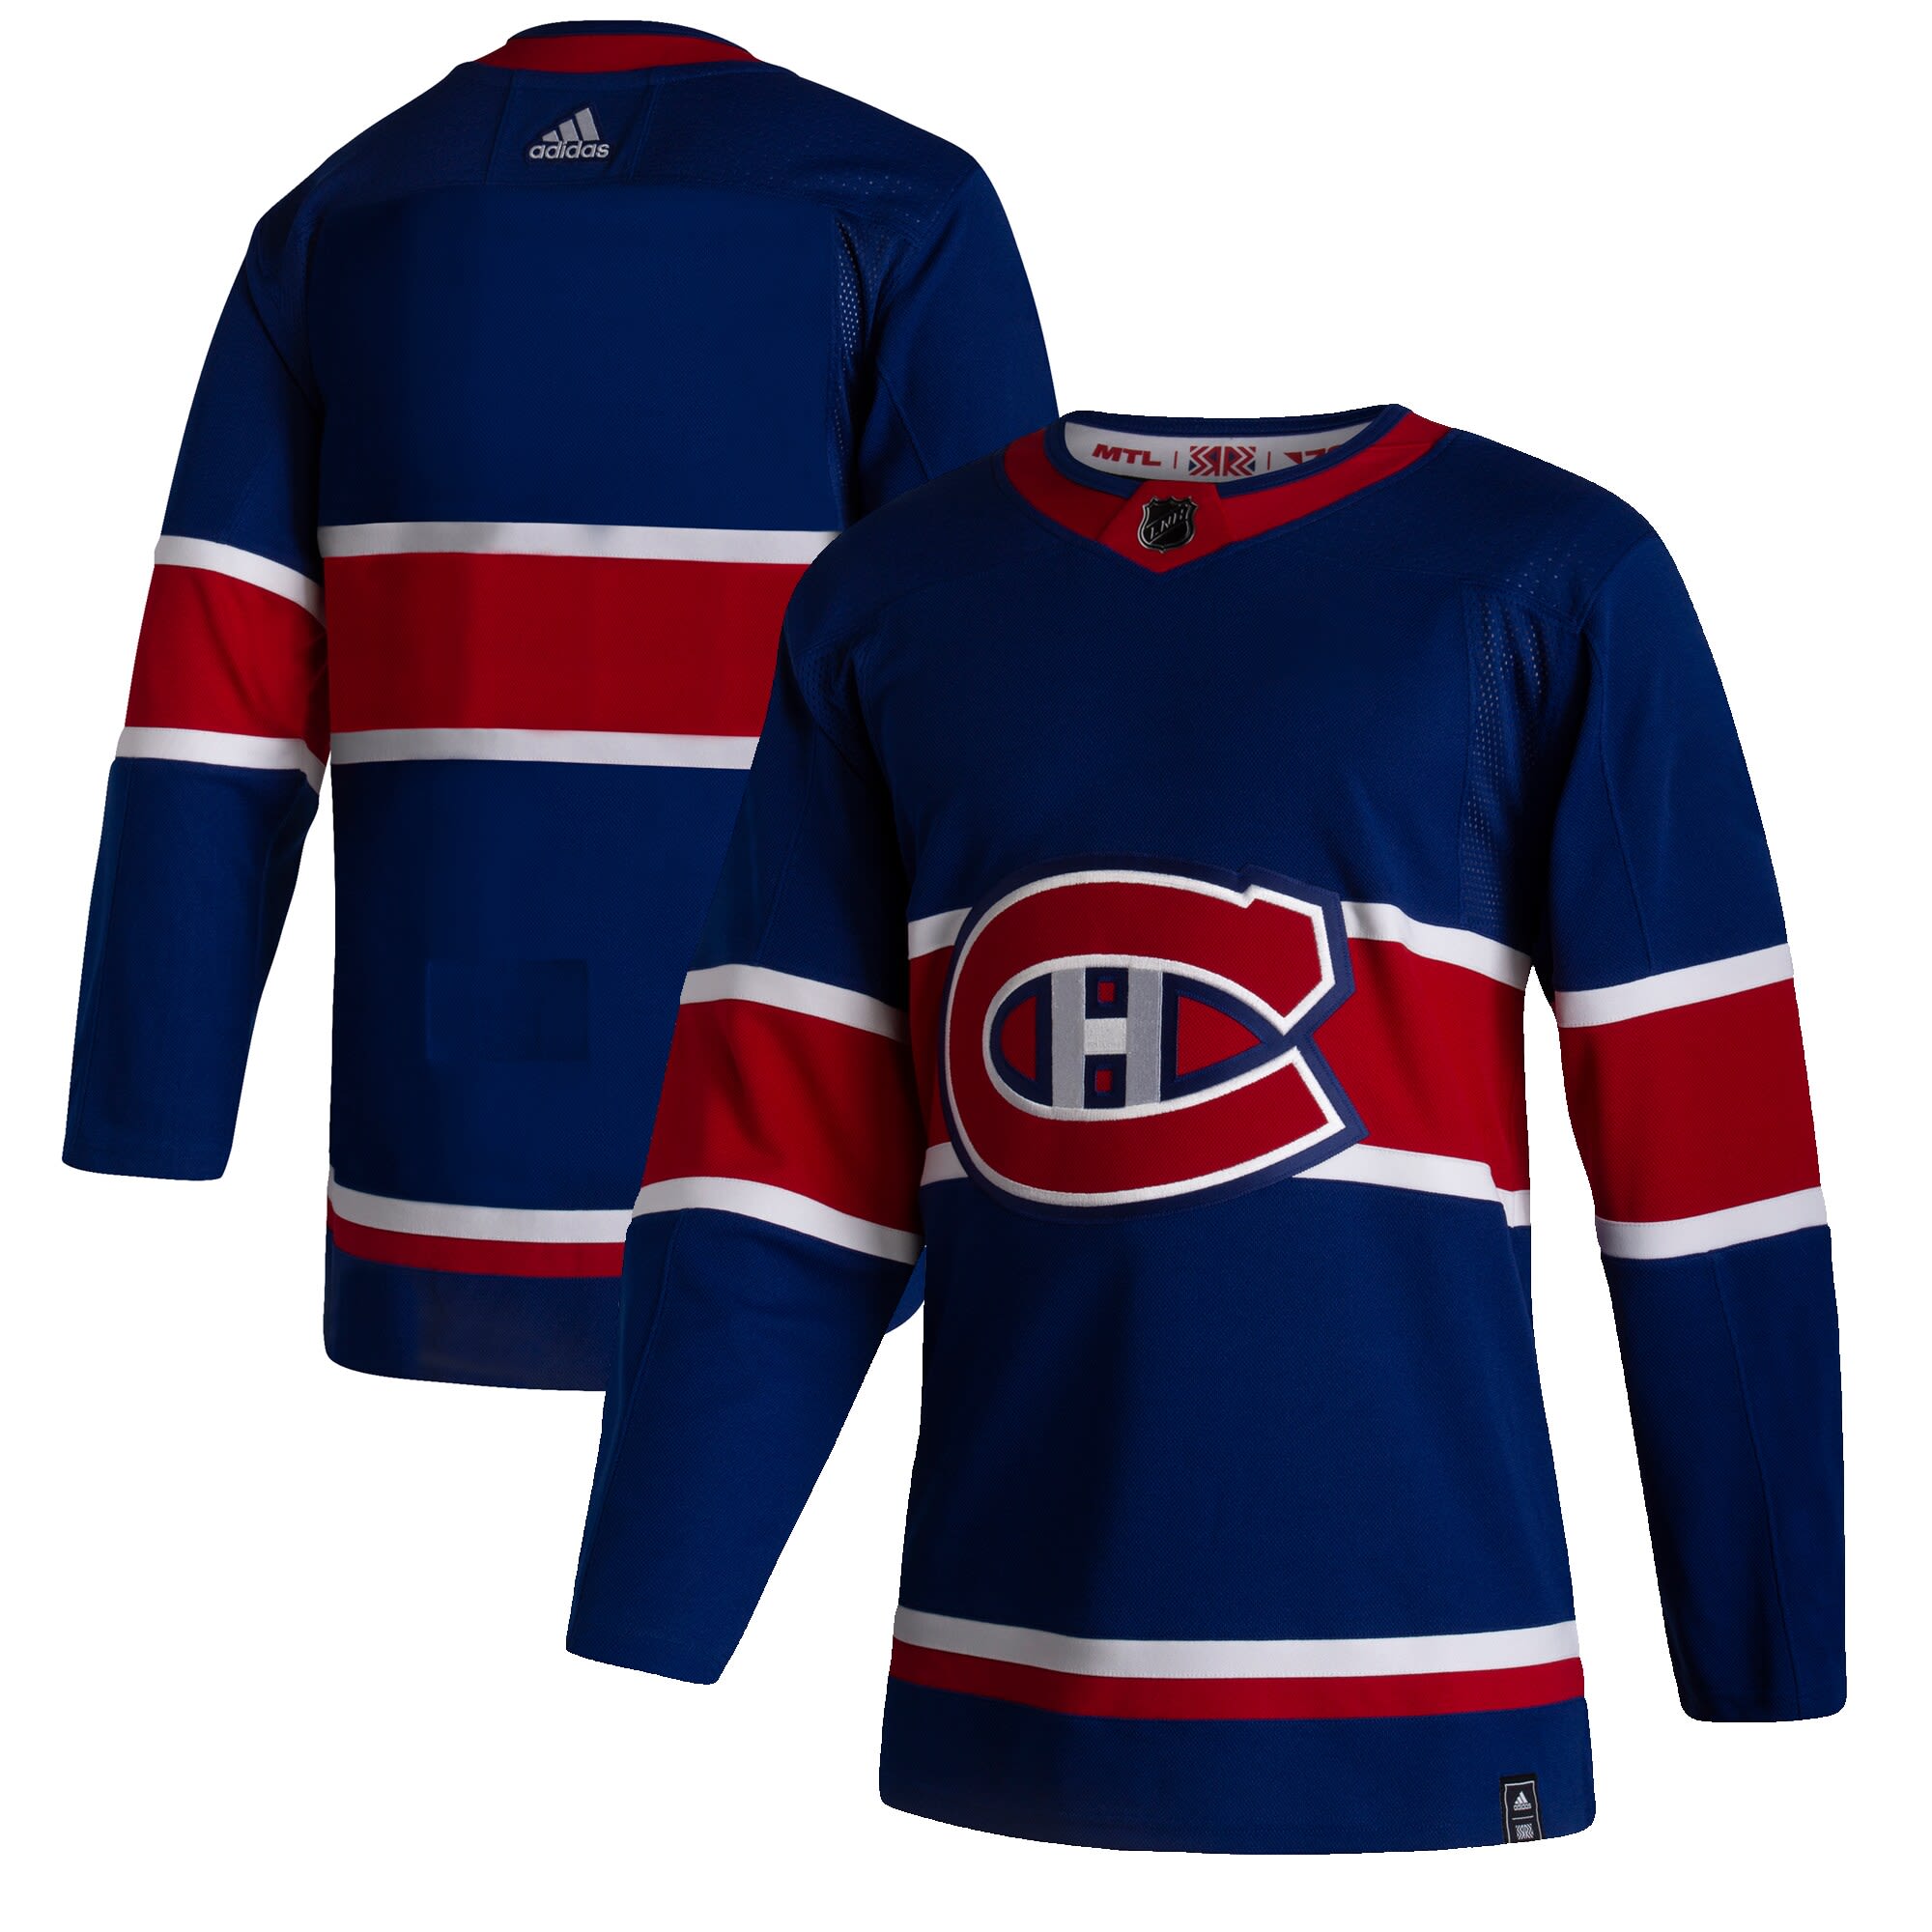 NHL fans will love these Reverse Retro jerseys